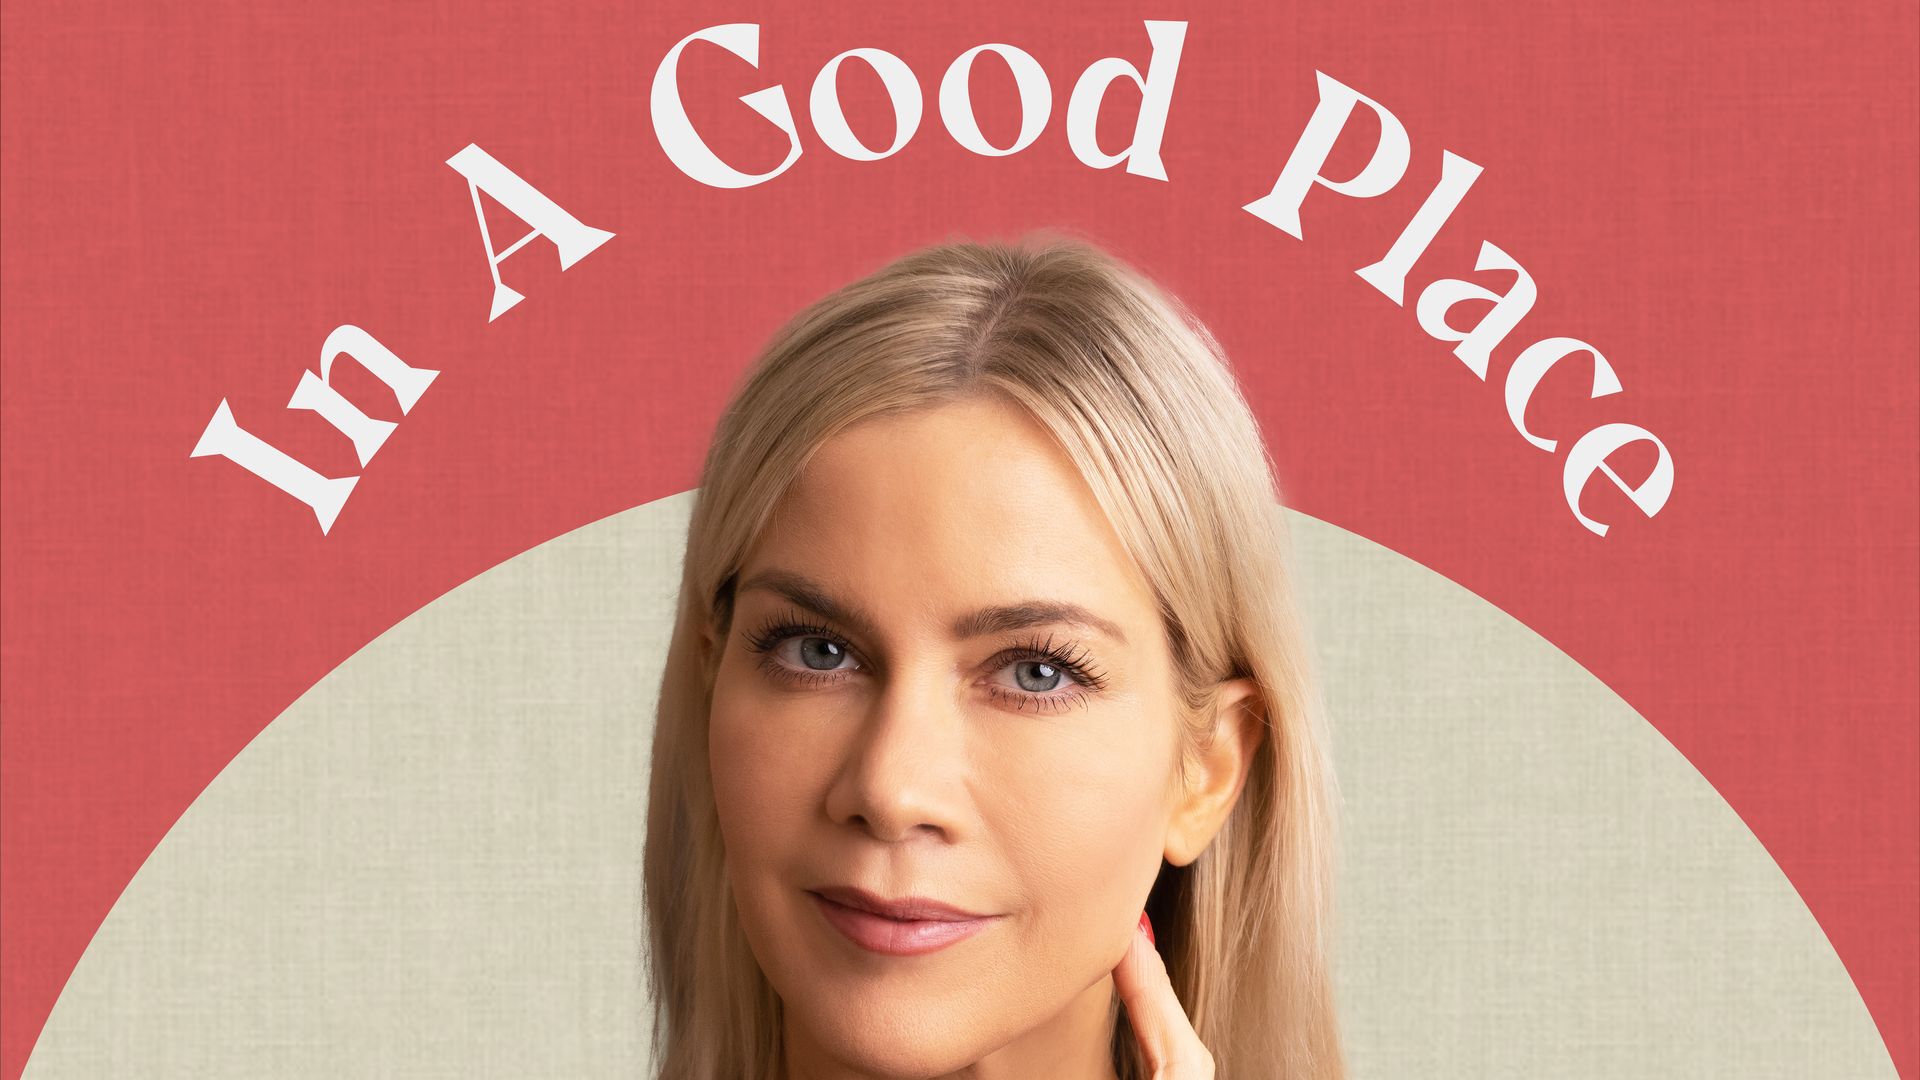 Kate Lawler In A Good Place image